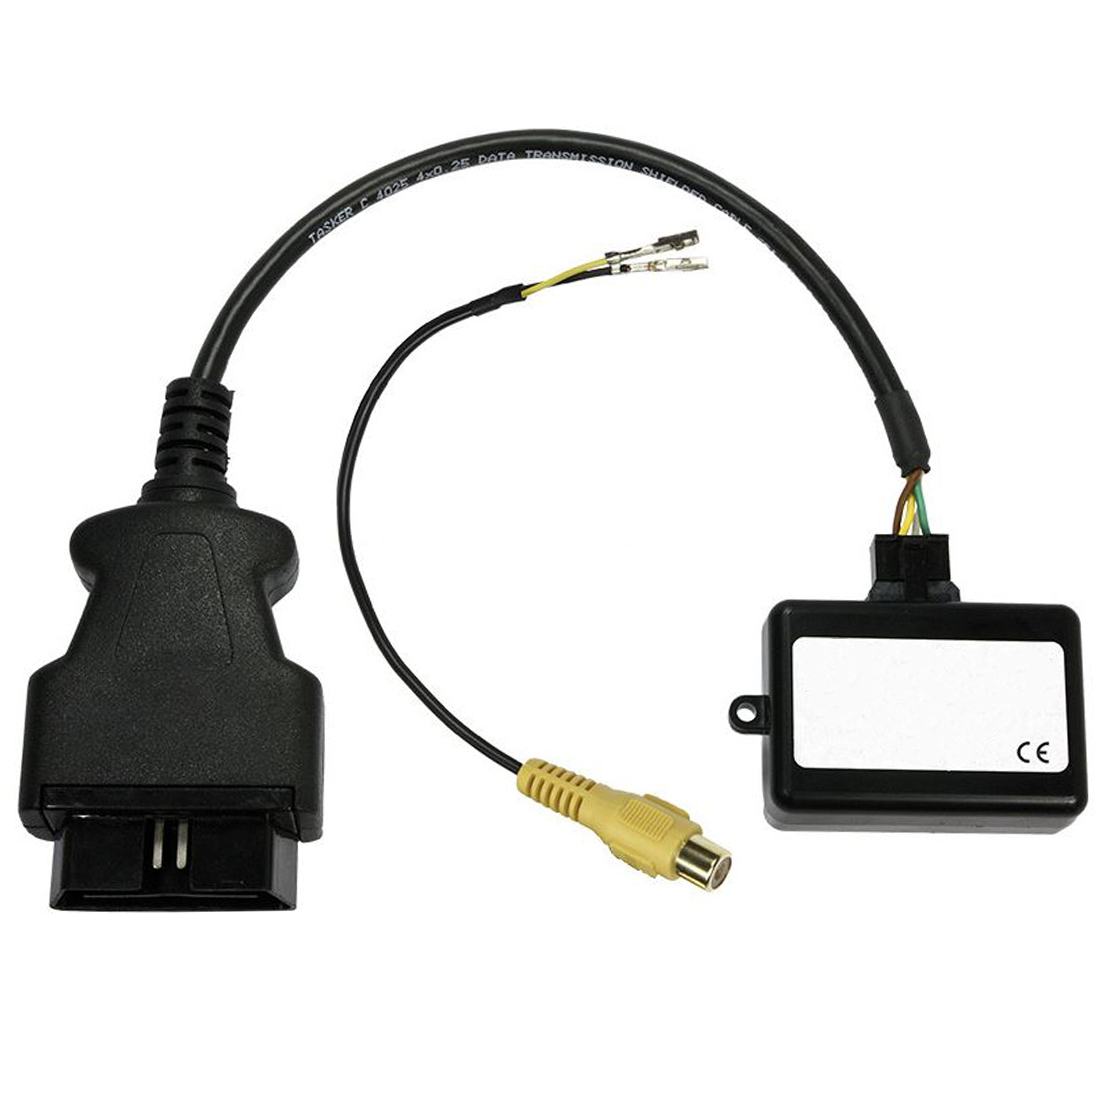 Alegaciones patio Cooperación Rear View Camera OBD Activator for use on various Volkswagen Models |  Allows rear view camera activation | for MIB3 (Composition Media, Discover  Media, Discover Pro) systems. NTSC cameras only. - Connects2Vision